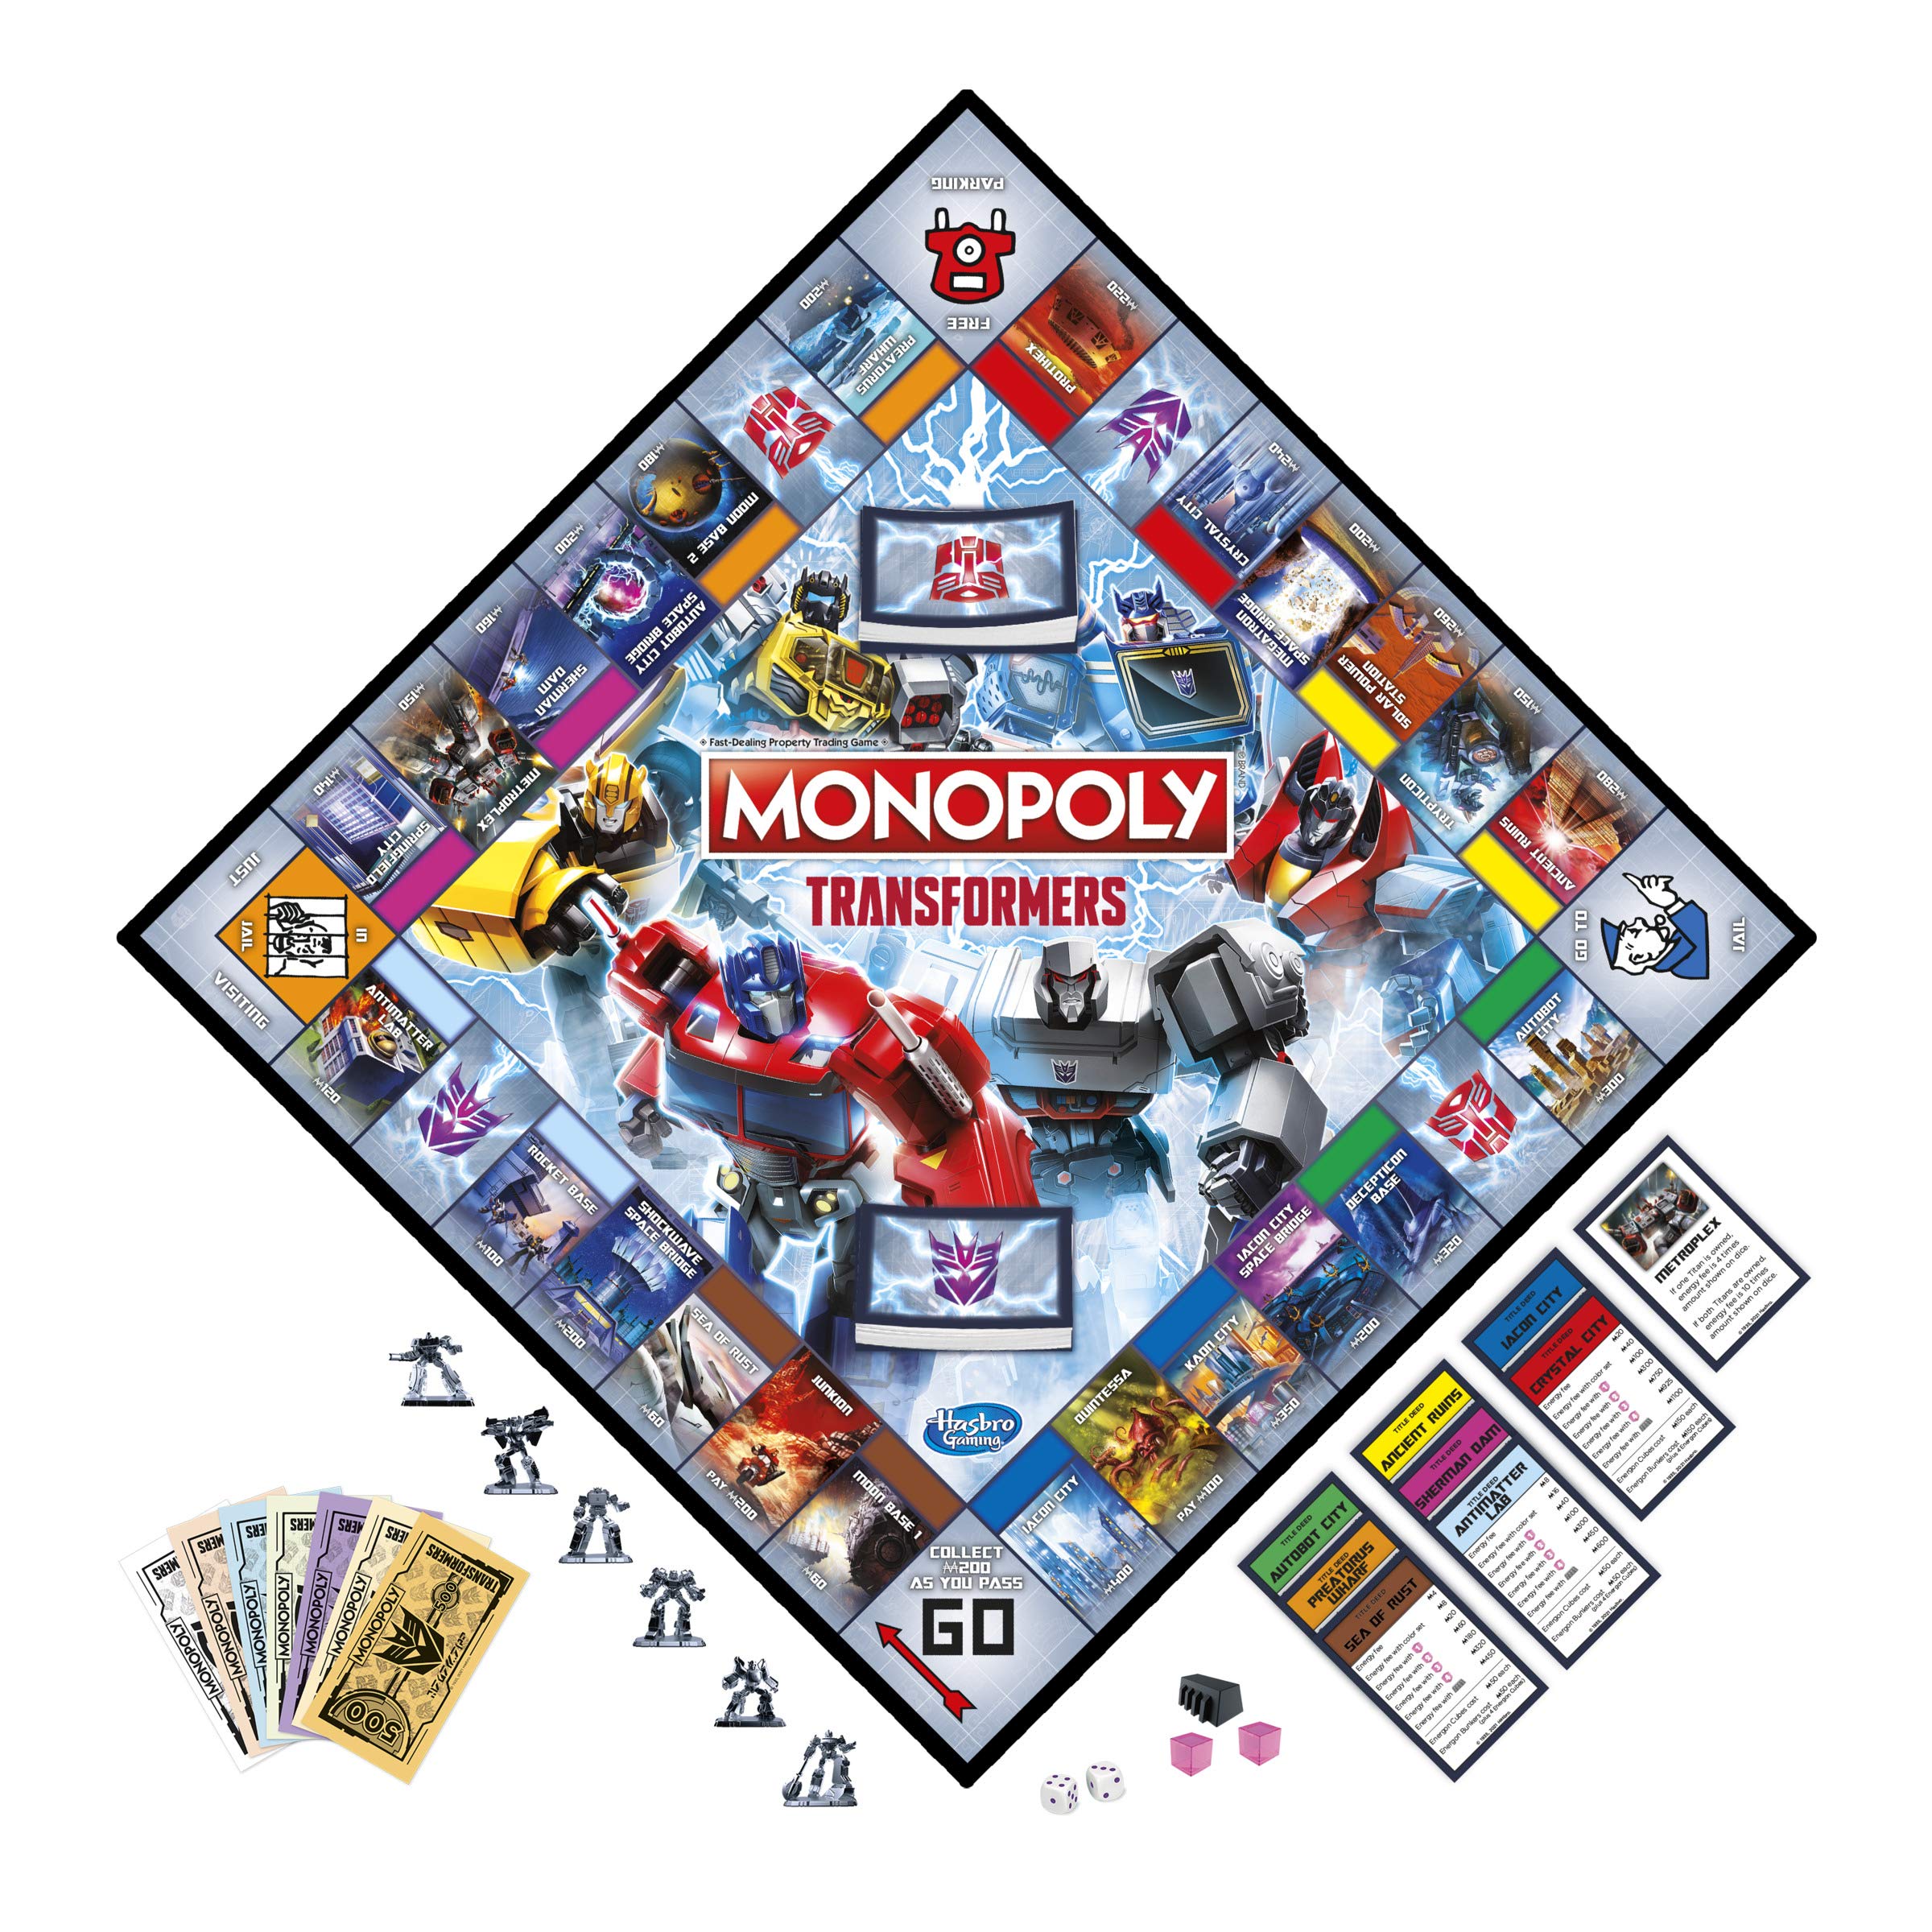 MONOPOLY: Transformers Edition Board Game for 2-6 Players Kids Ages 8 and Up, Includes Autobot and Decepticon Tokens